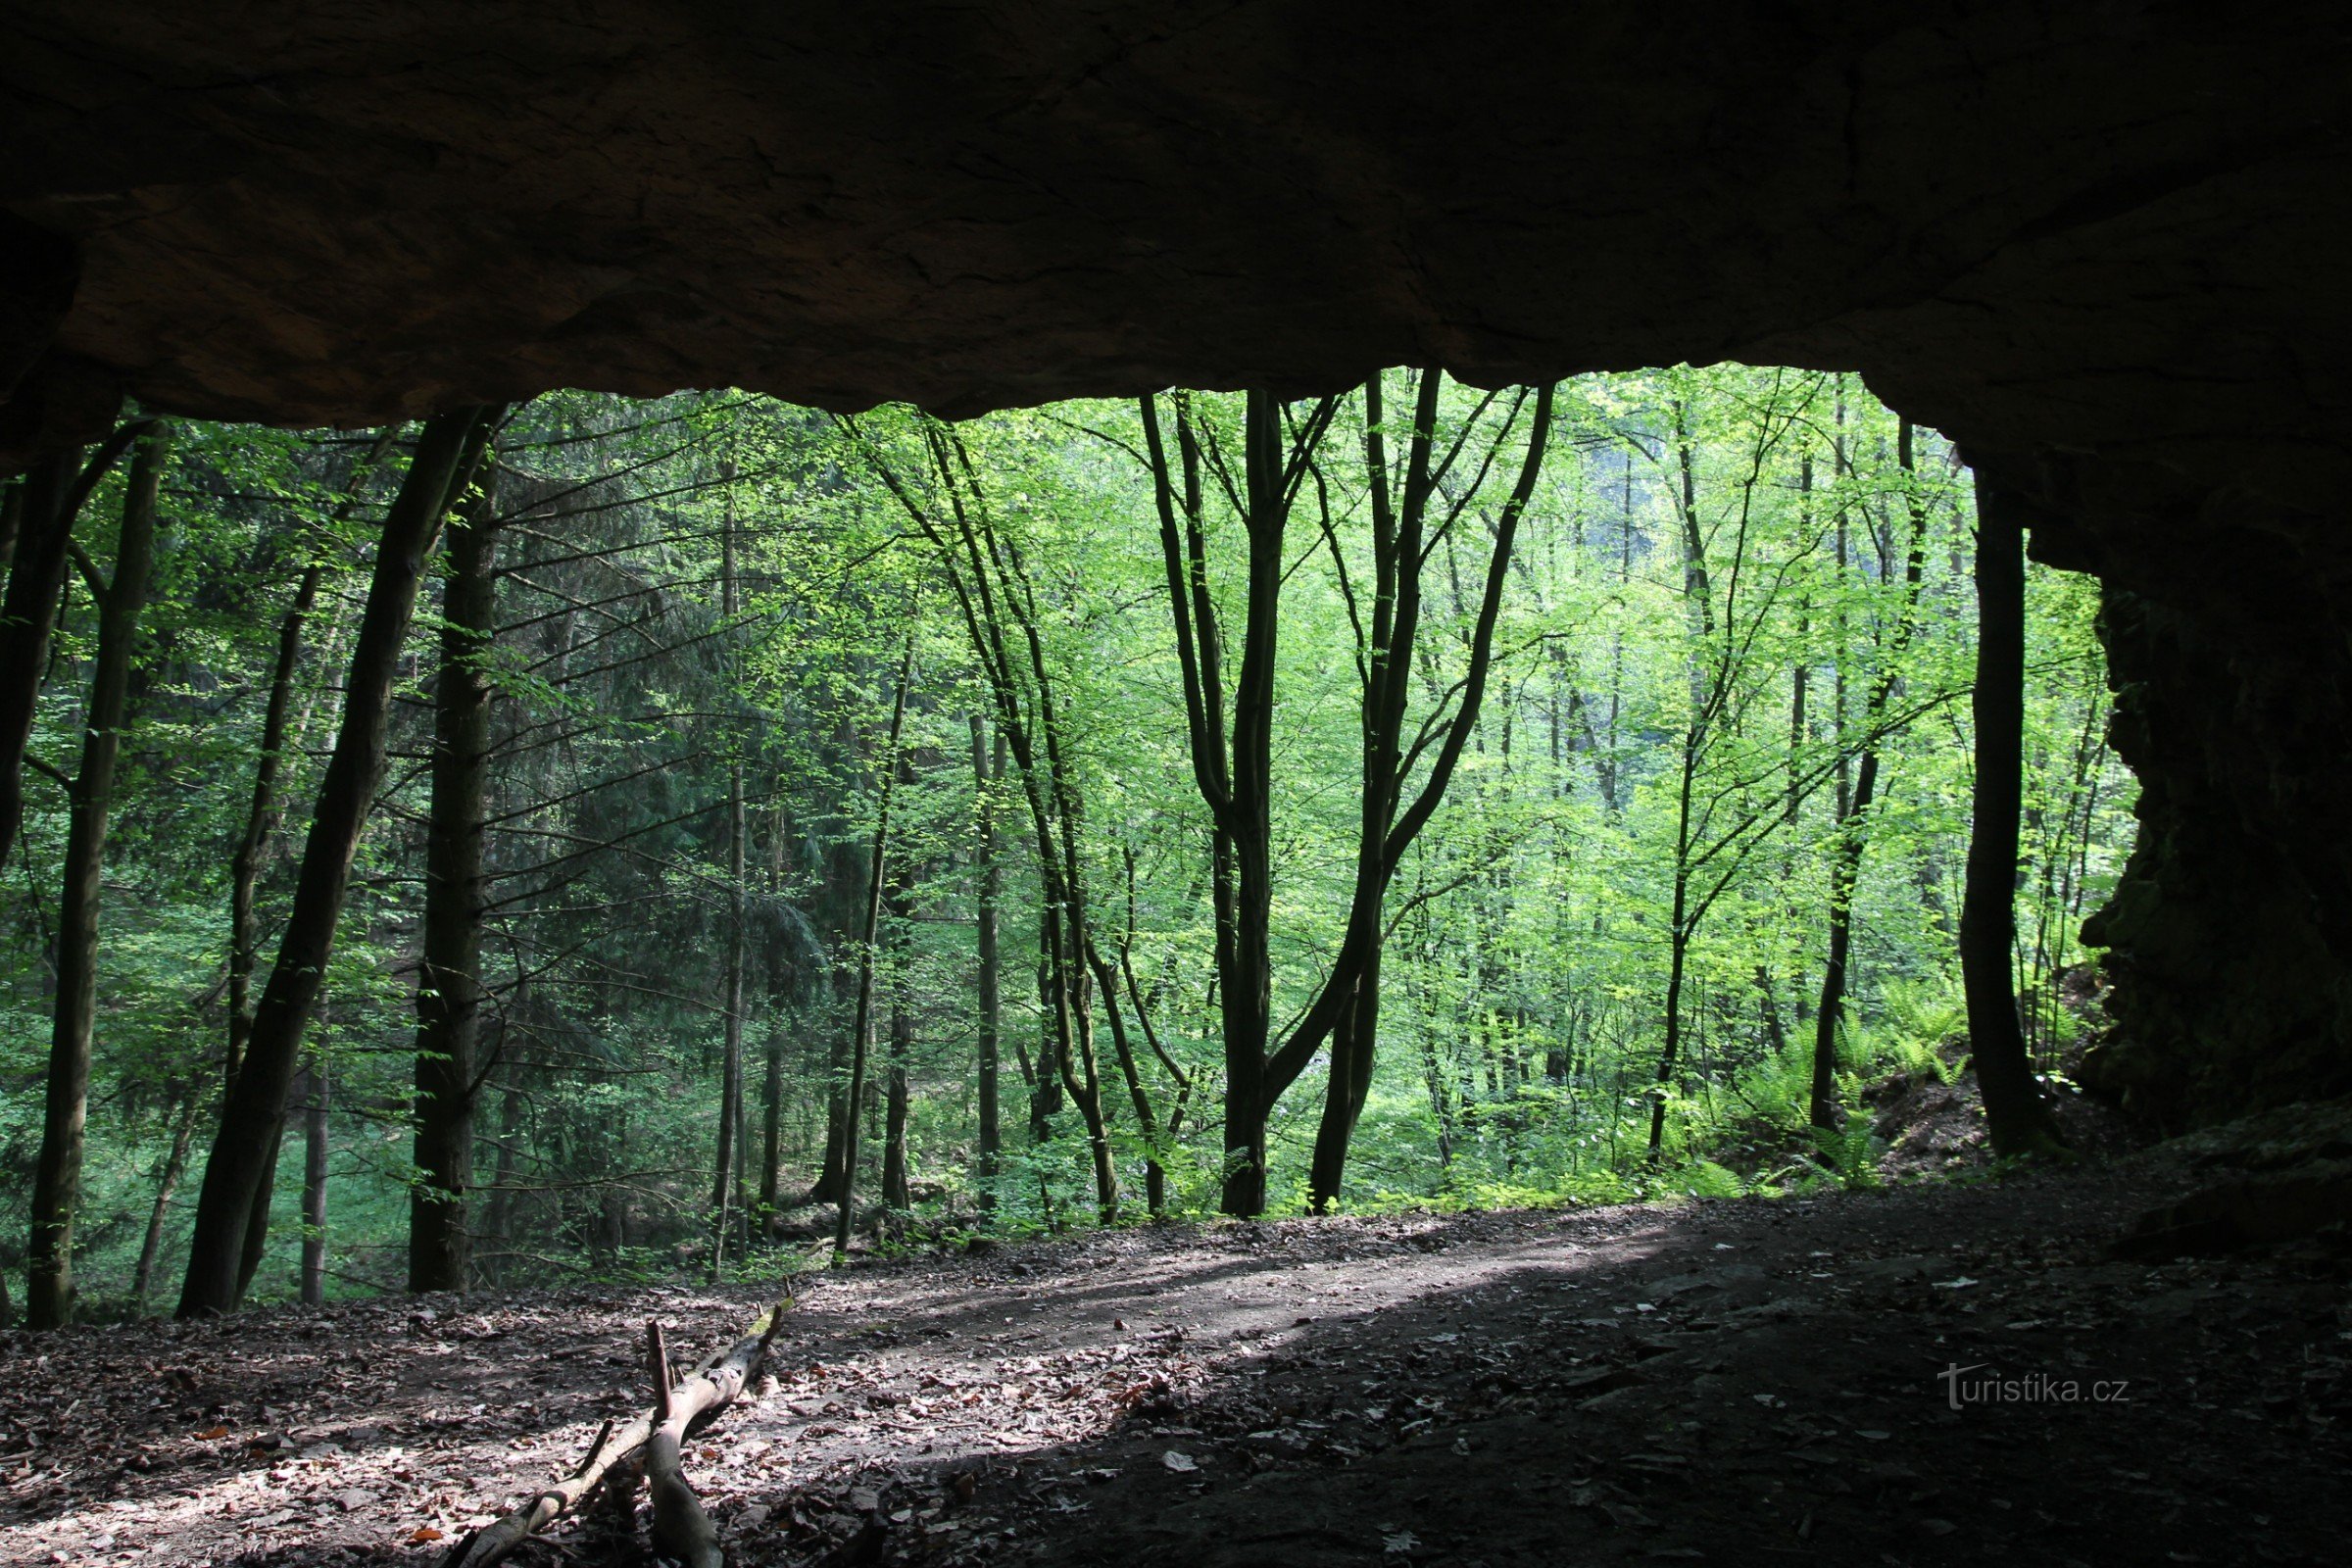 View from the cave to the Haldy valley